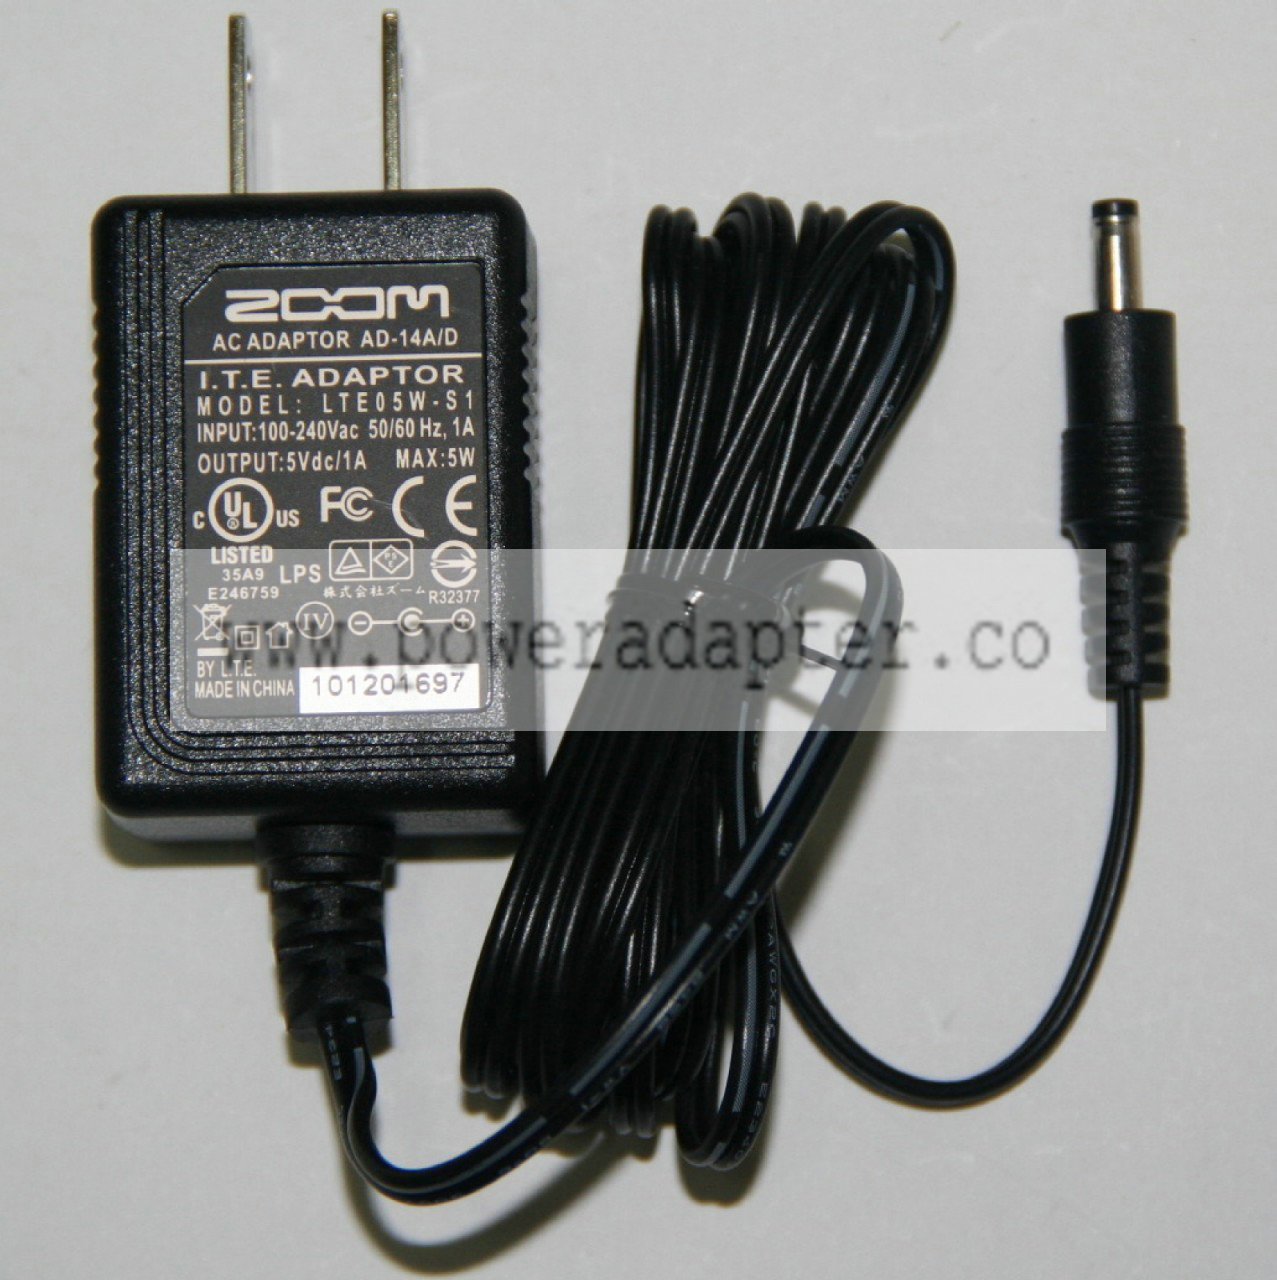 Zoom AD-114A/D 5 Volt DC power supply for H4N, G3, ZR16 Product Description Zoom AD-114A/D 5 Volt DC power supply for